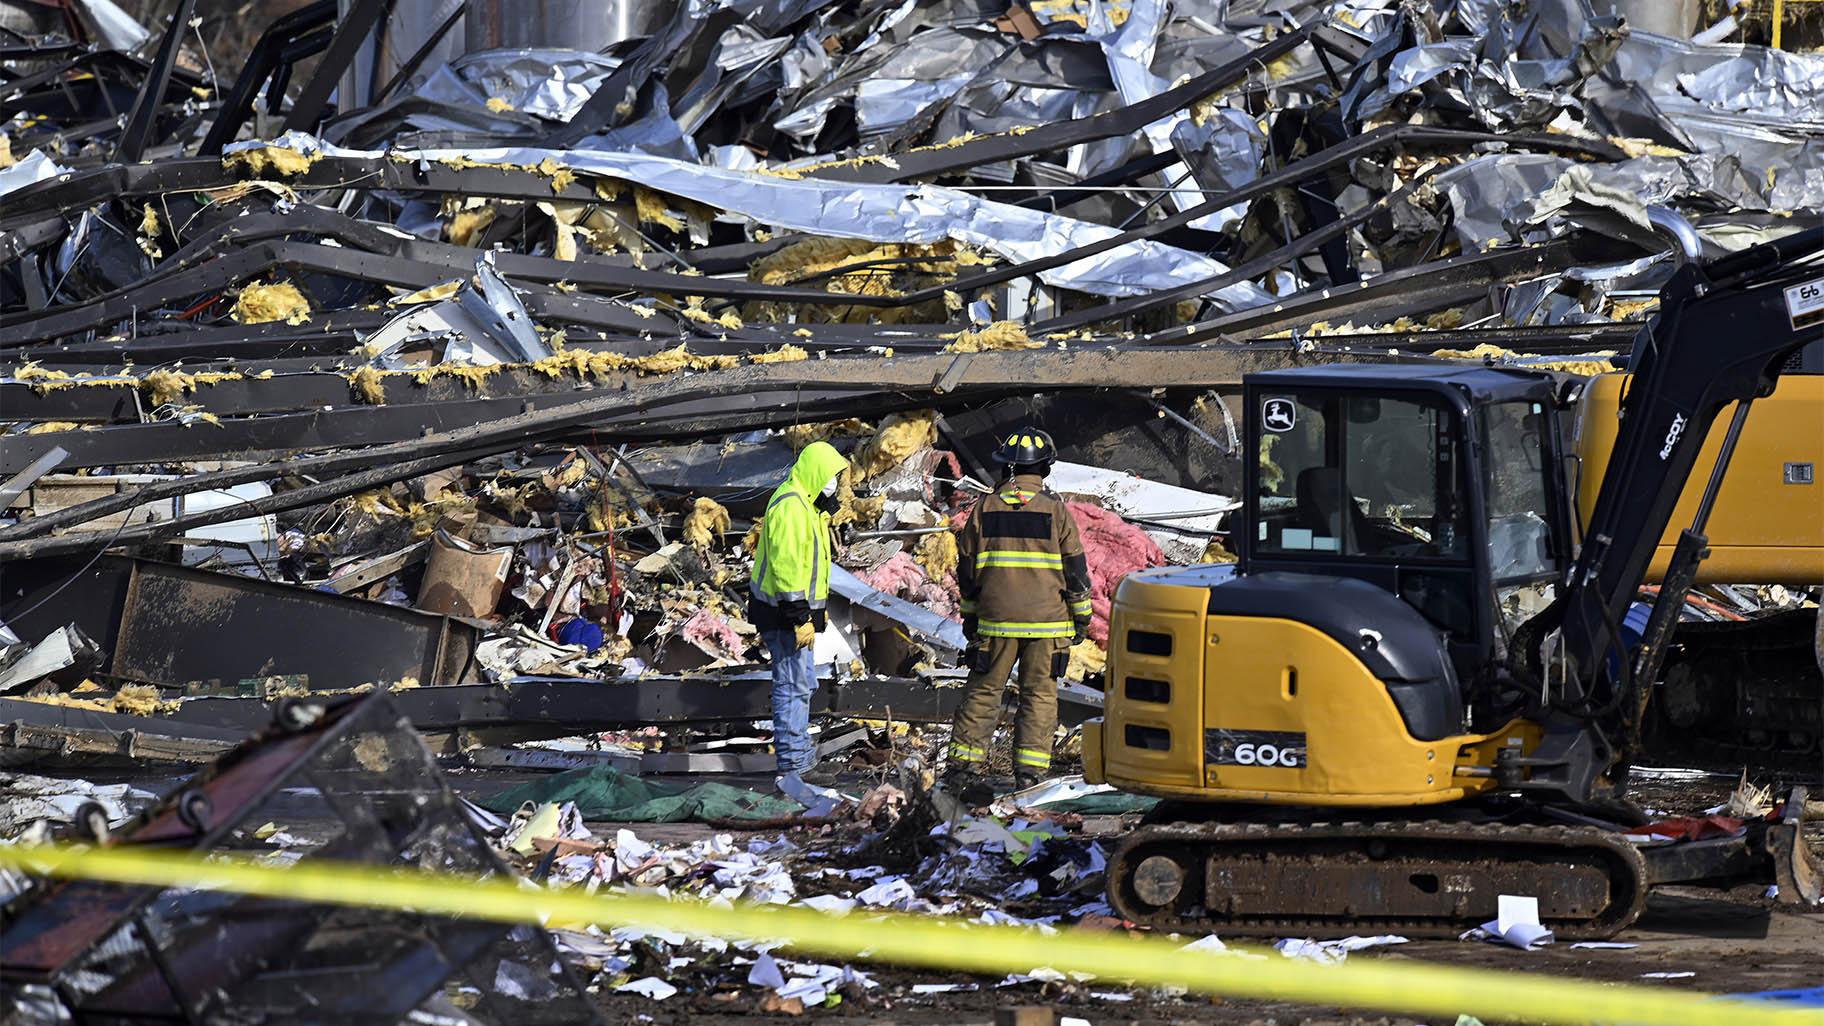 Emergency response workers dig through the rubble of the Mayfield Consumer Products candle factory in Mayfield, Ky., Saturday, Dec. 11, 2021. Tornadoes and severe weather caused catastrophic damage across multiple states late Friday, killing several people overnight. (AP Photo / Timothy D. Easley)